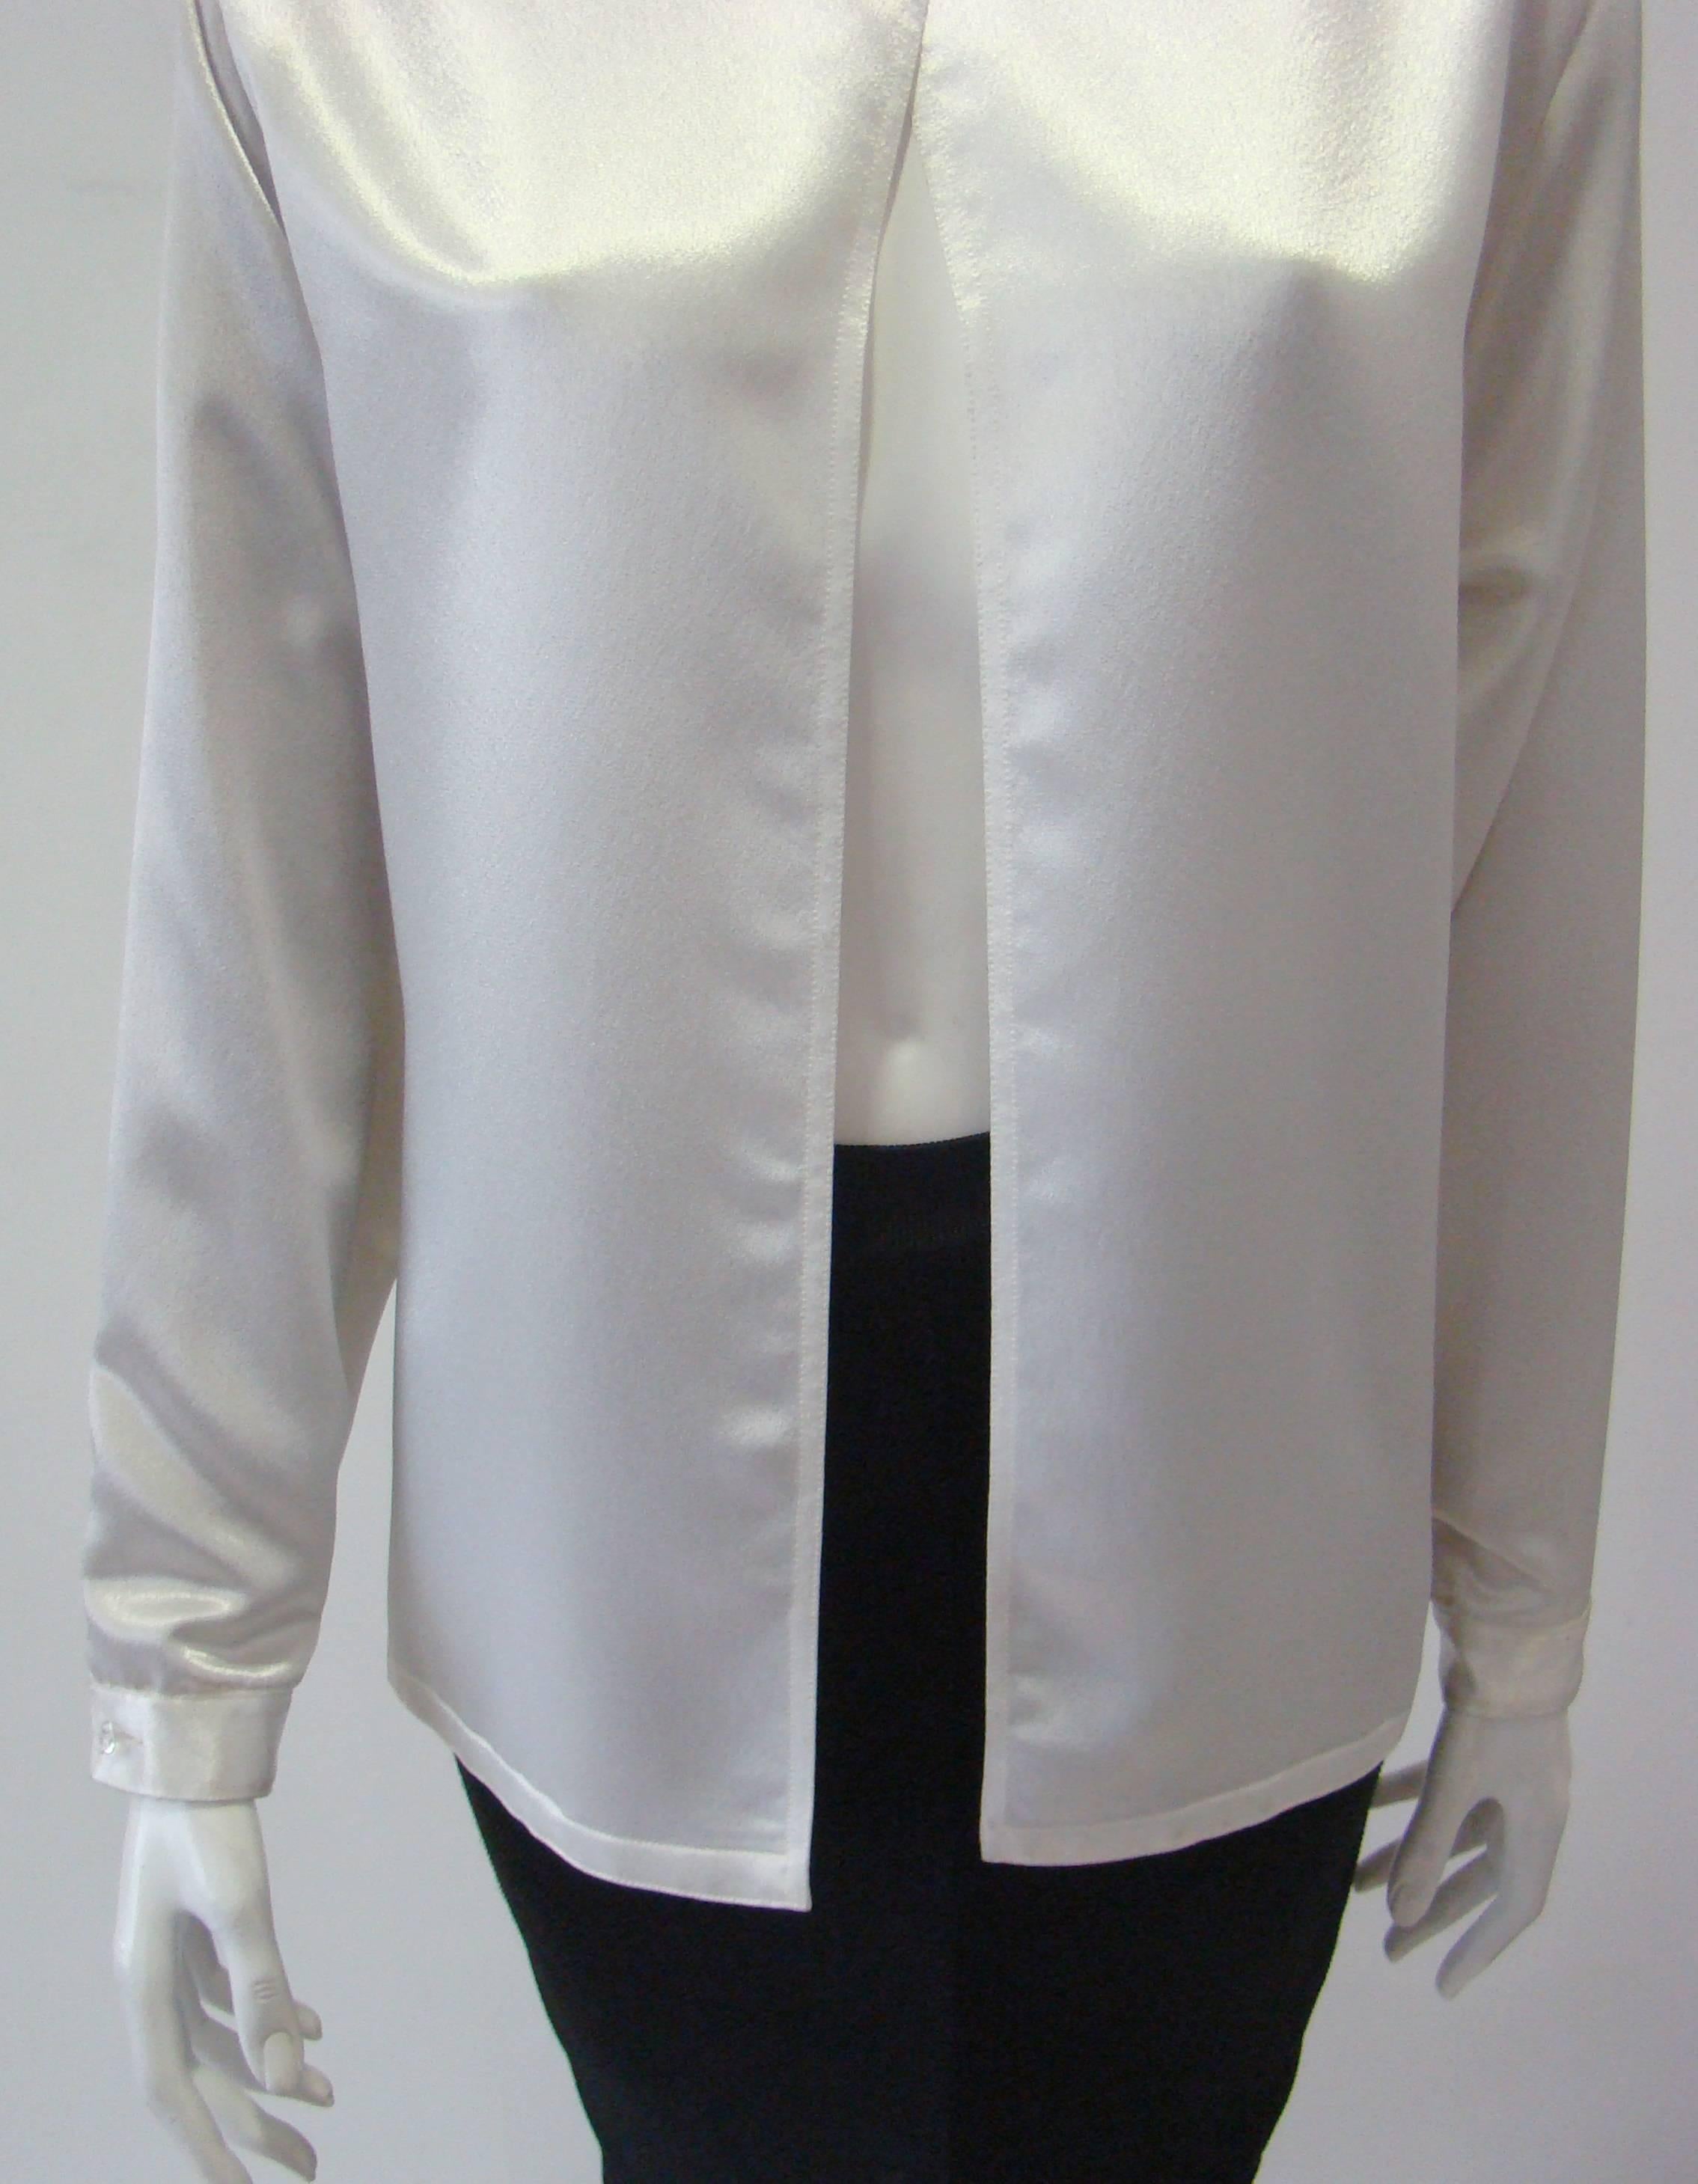 Gianni Versace Couture Silk Shirt In Excellent Condition For Sale In Athens, Agia Paraskevi